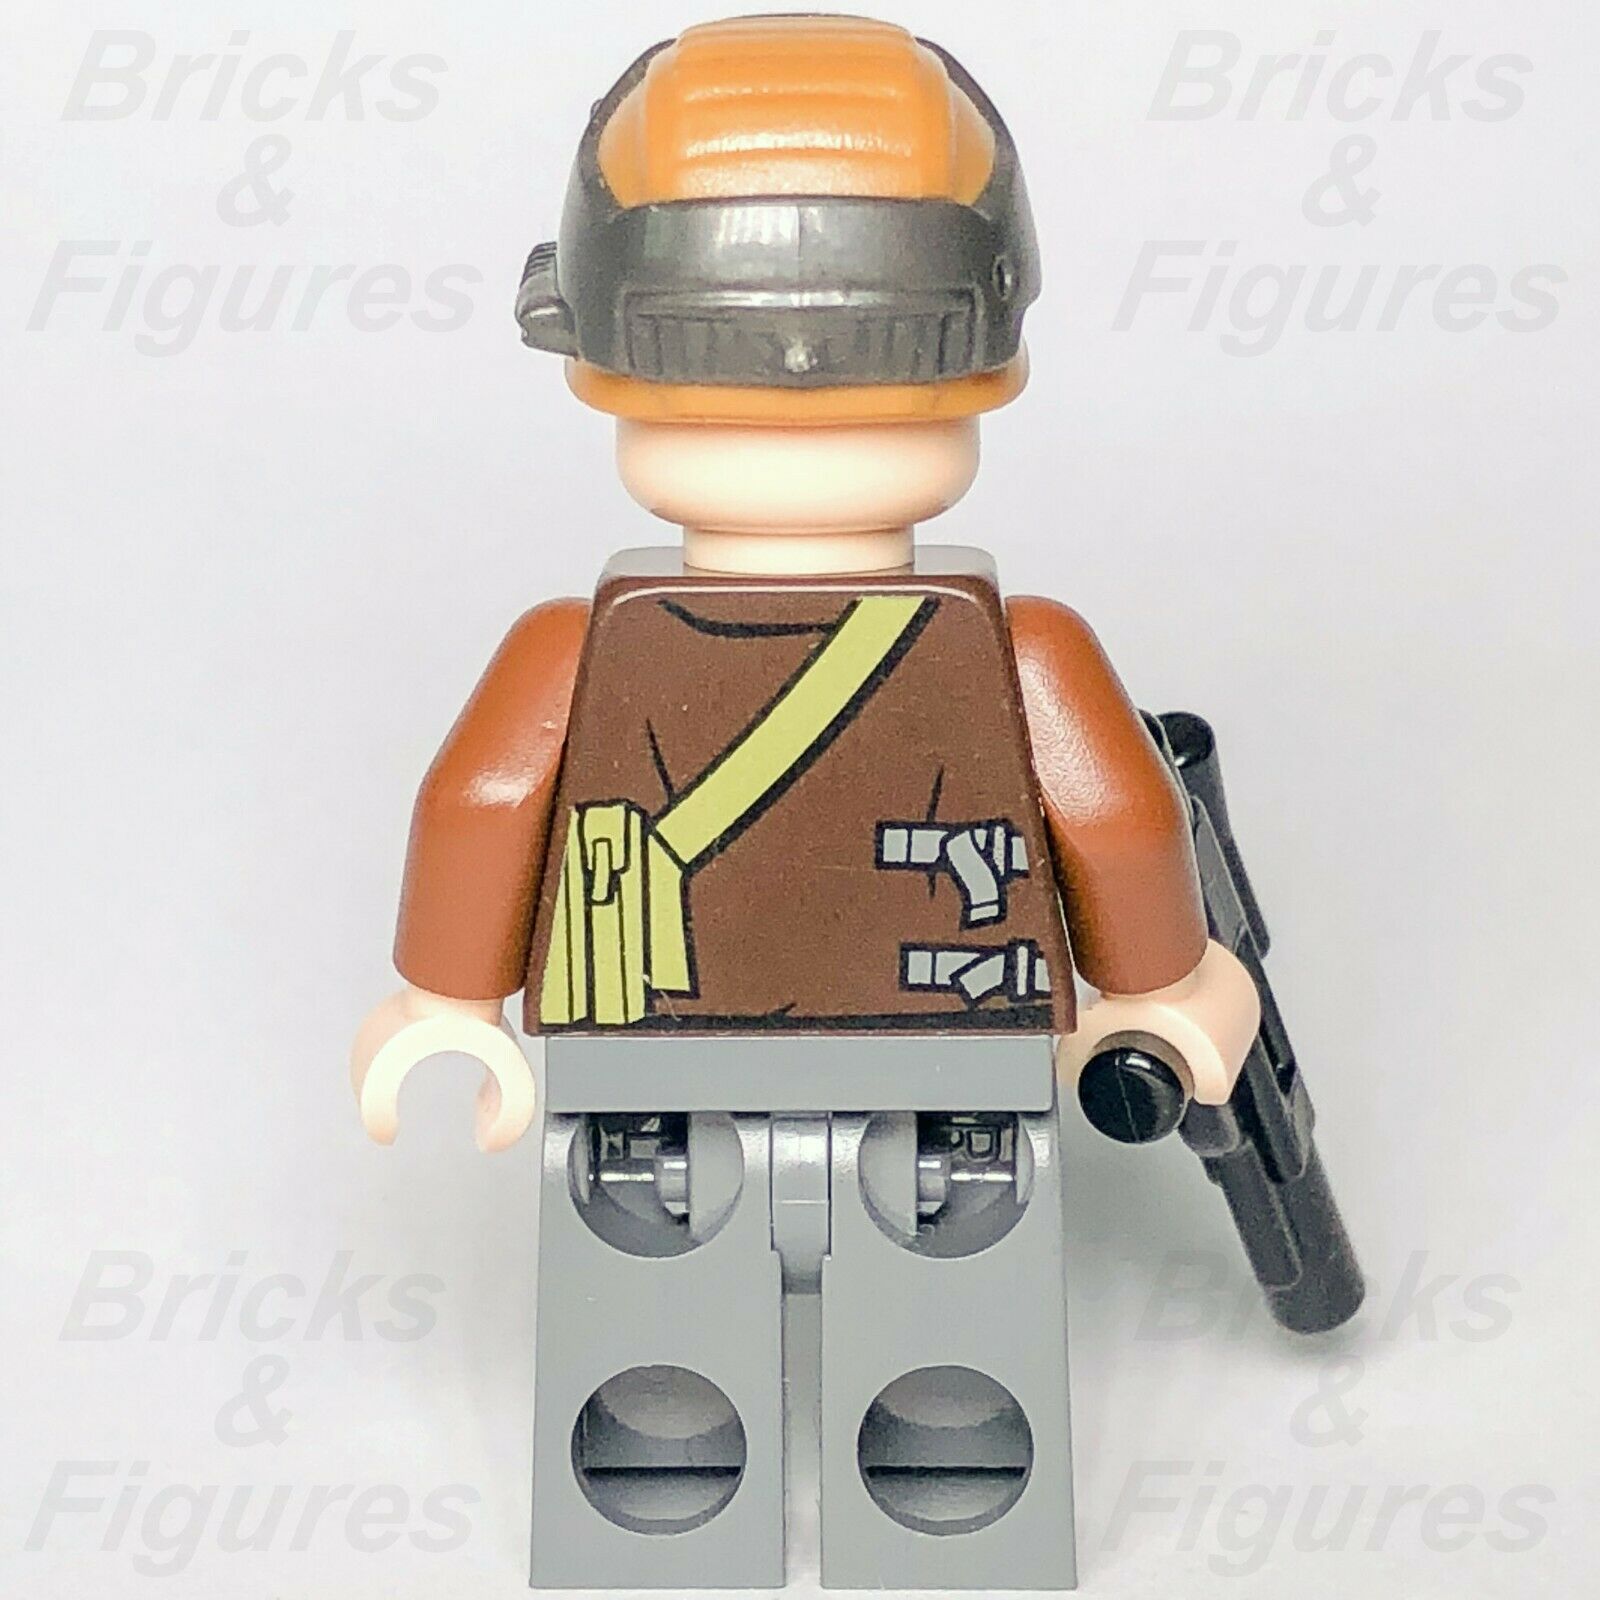 New Star Wars LEGO Private Calfor Rebel Trooper Rogue One Minifigure 75164 - Bricks & Figures